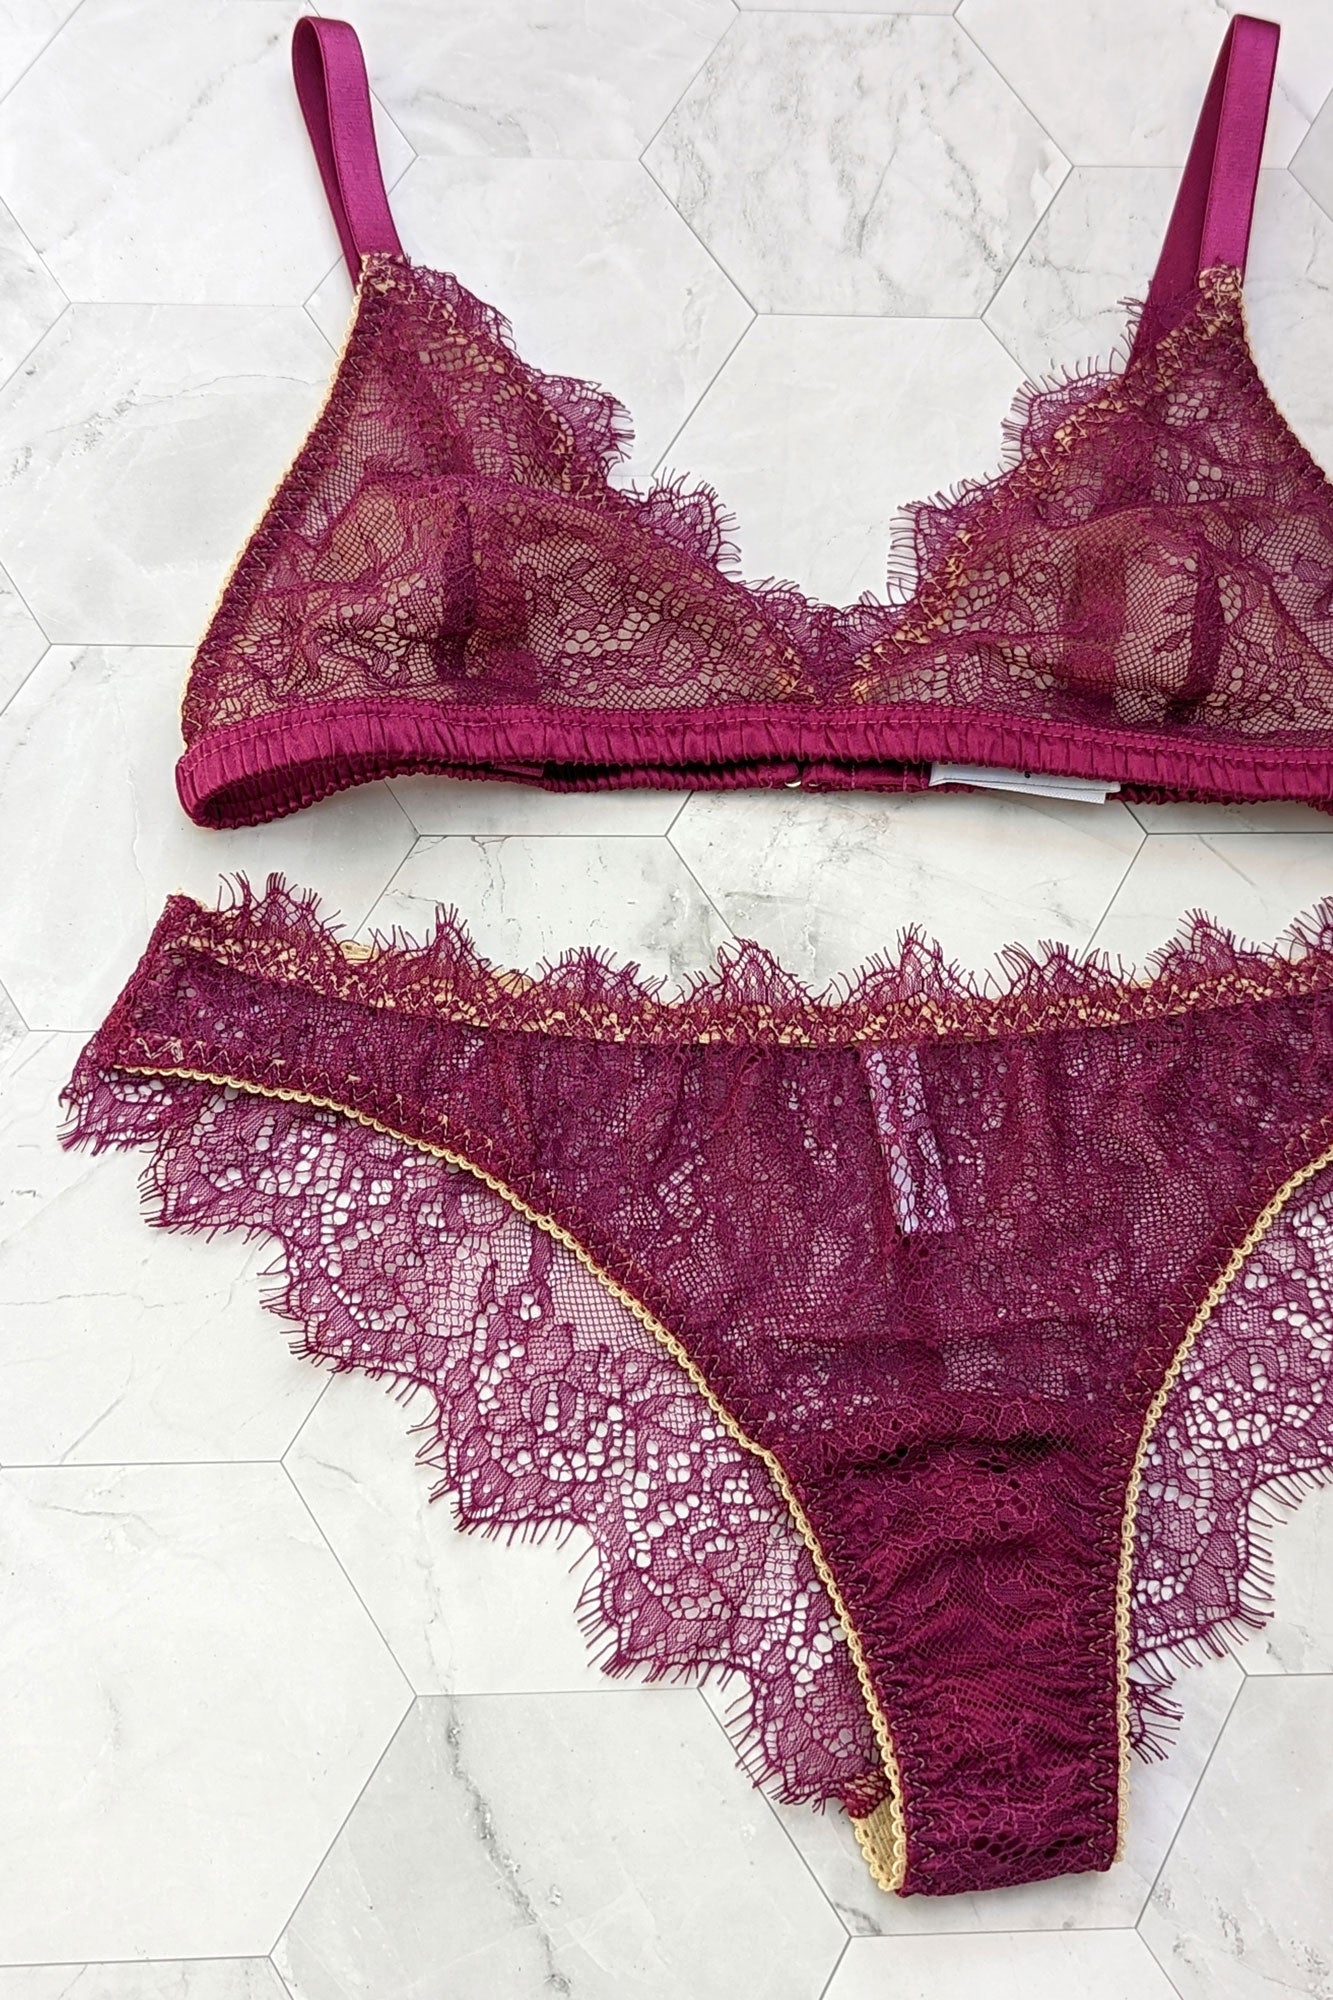 Lace lingerie set for Valentine's Day with magenta pink silk trim